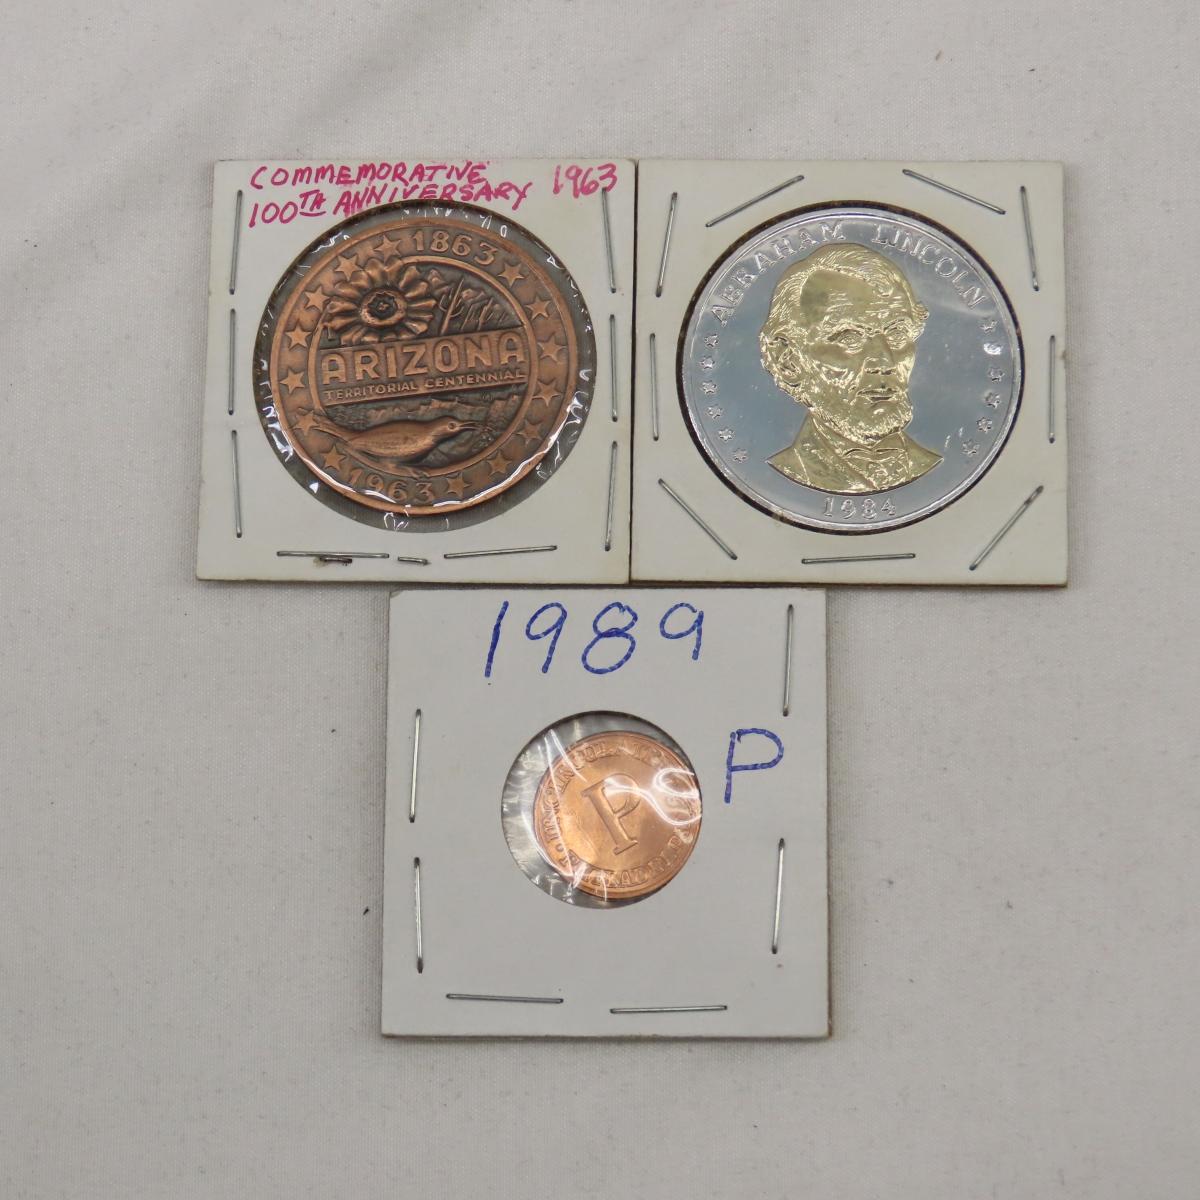 First Day Covers, commemorative coins, stamp book